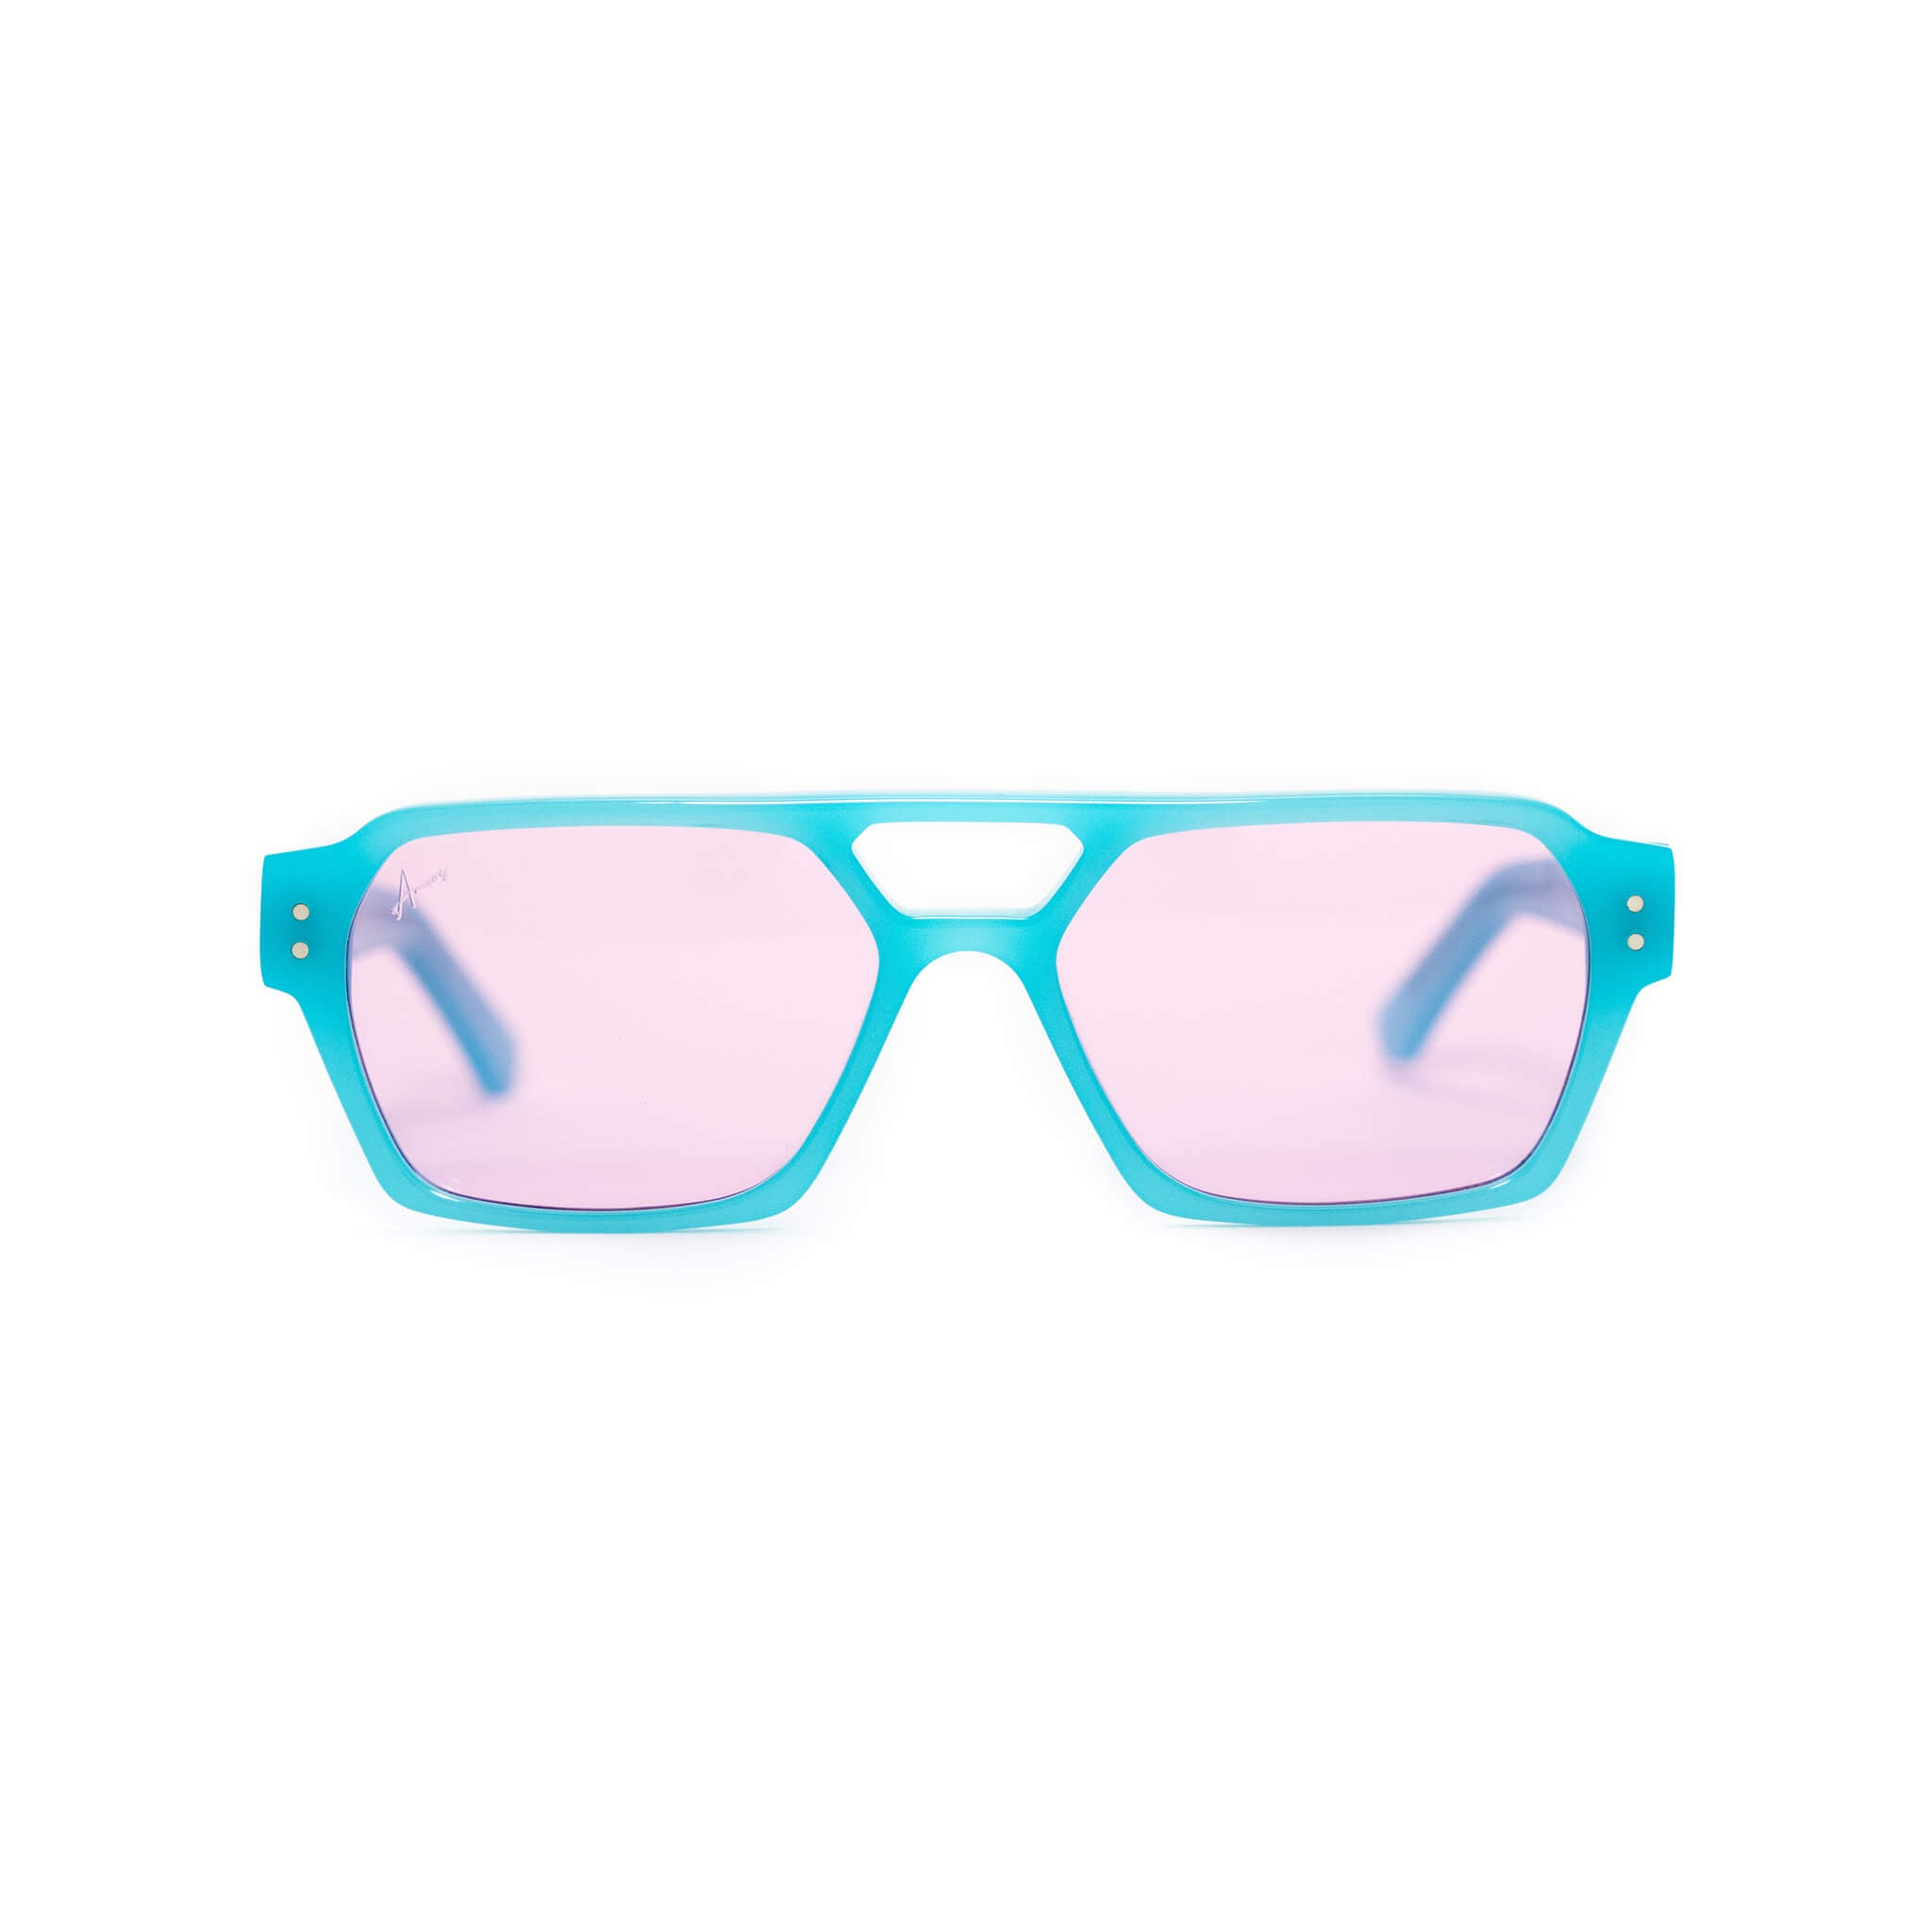 Ego sunglasses in opal blue and pink from Ameos